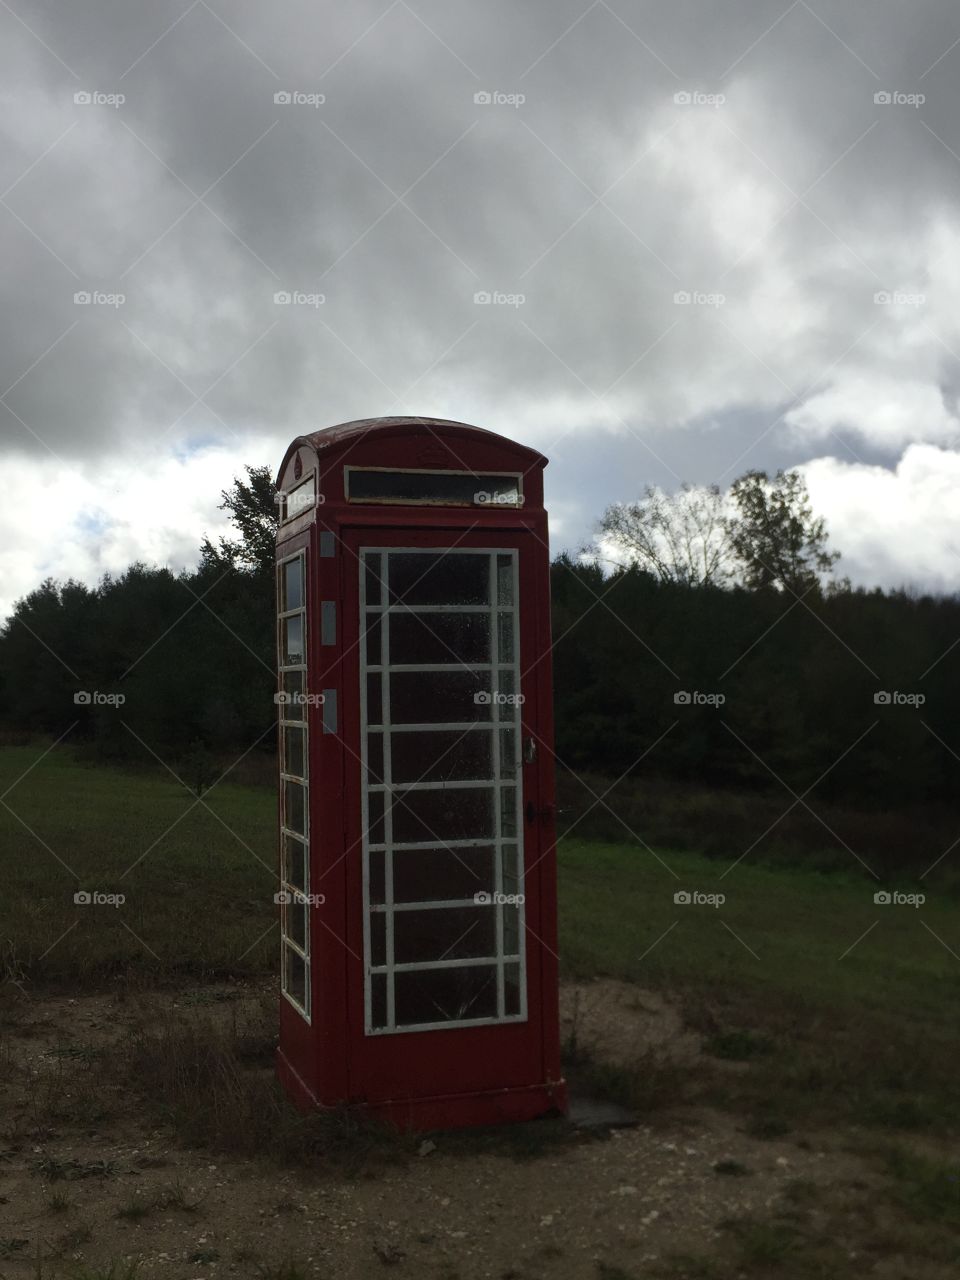 Isn’t this the cutest little  phone booth of a bus stop